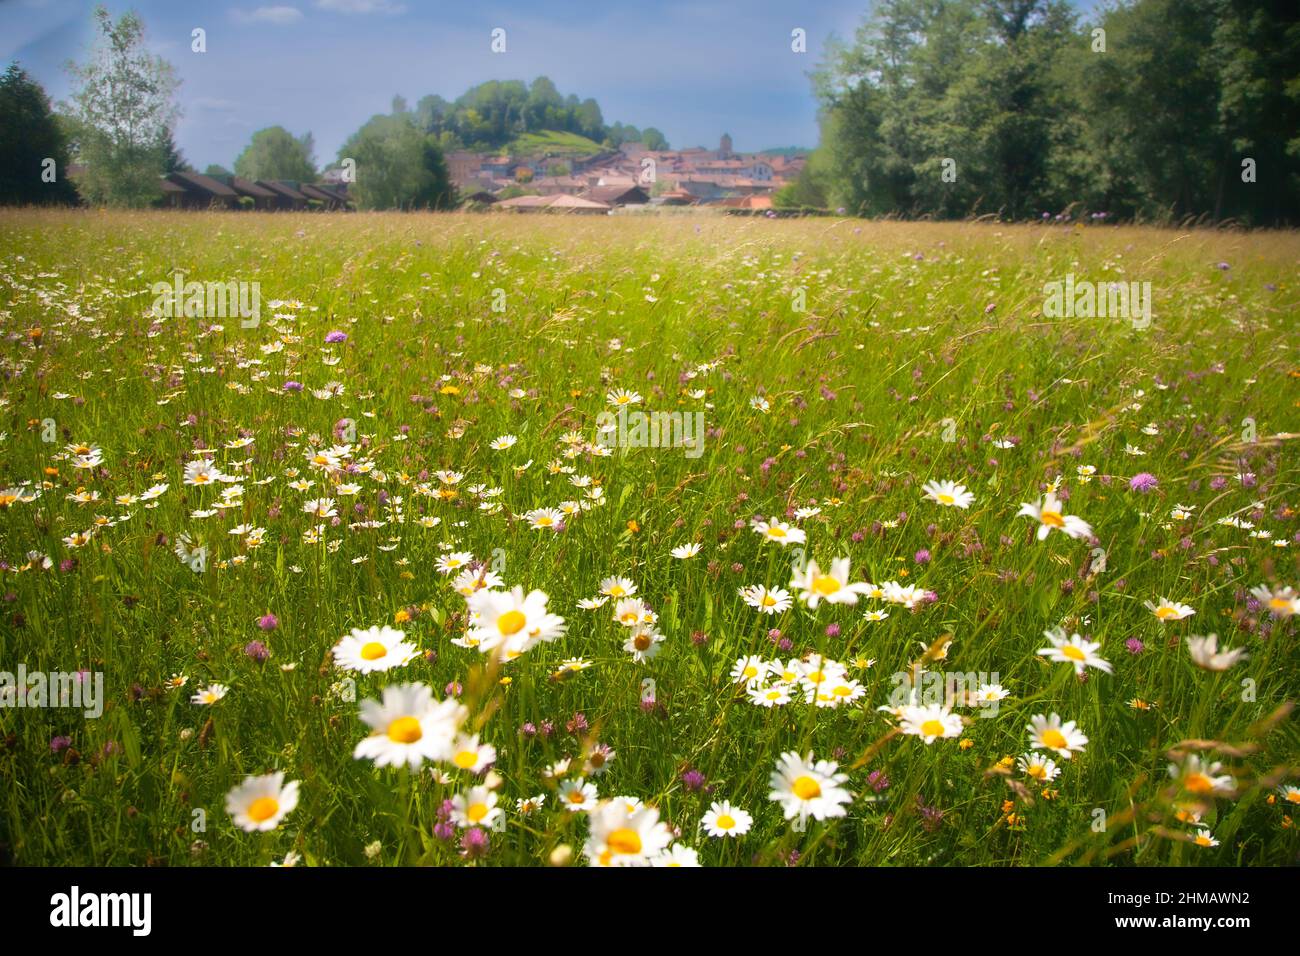 Daisies in the meadow with view of town Stock Photo